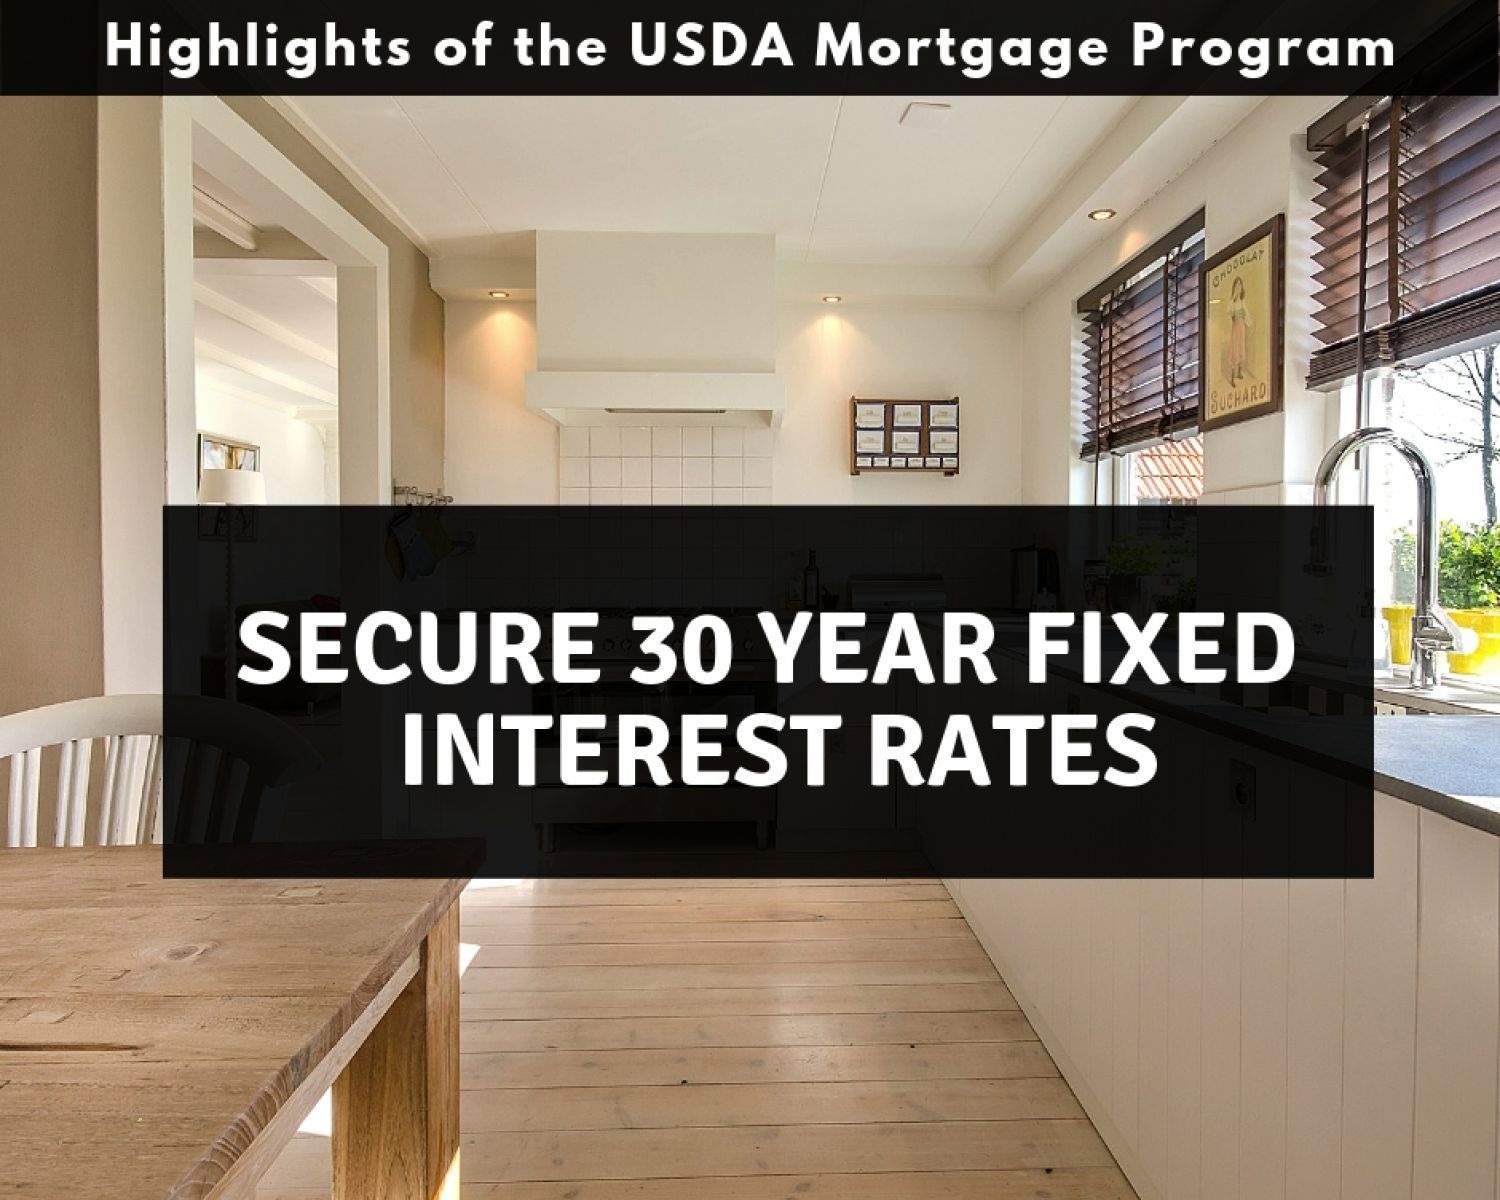 Pennsylvania USDA Mortgages have 30 year fixed interest rates